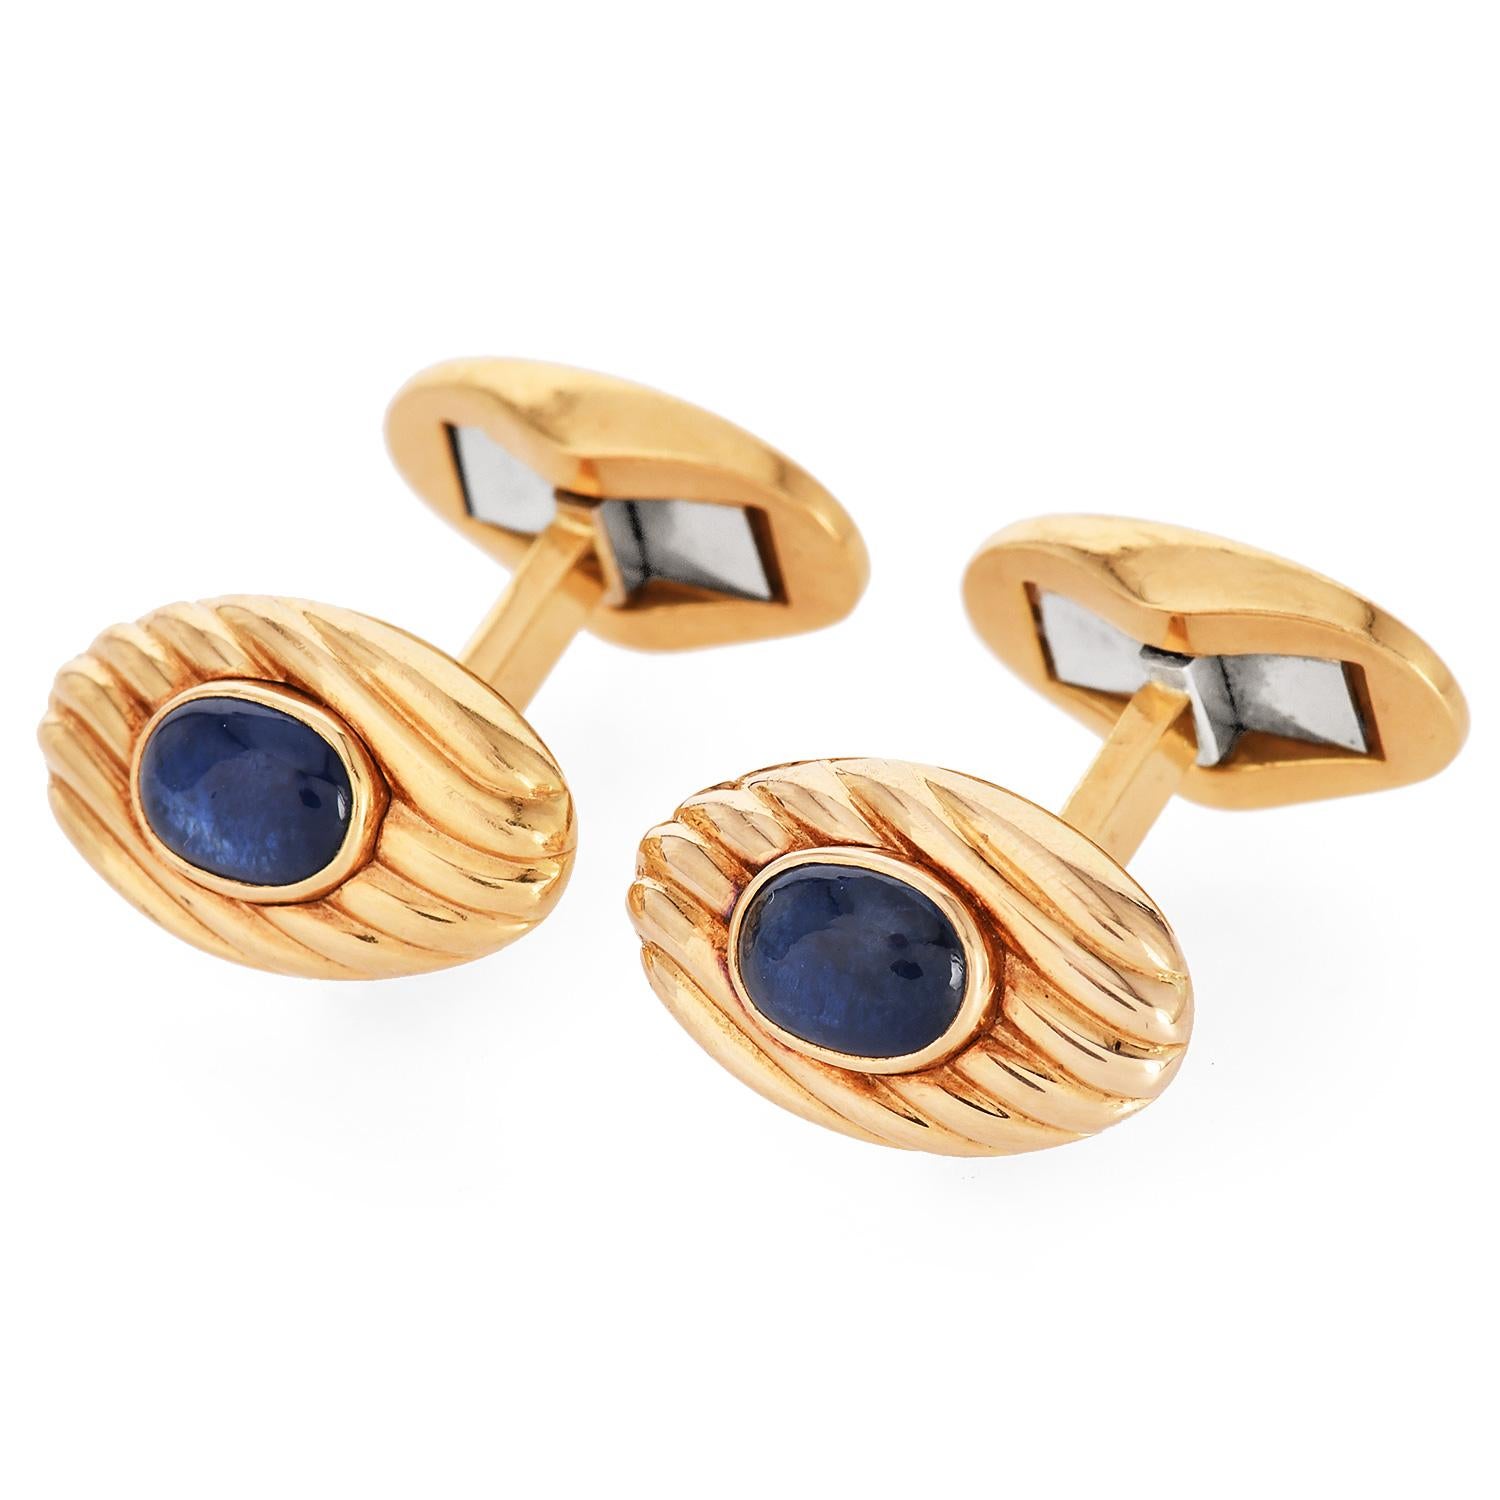 Asprey Vintage Sapphire 18K Gold Oval Cuff Links forged in solid 18K yellow gold oval face Grooved pattern cuff links with natural cabochon cut sapphires bezel set in the center

Marked: 18K

Measurements: 17mmx10mm

Sapphire: oval Cabochon